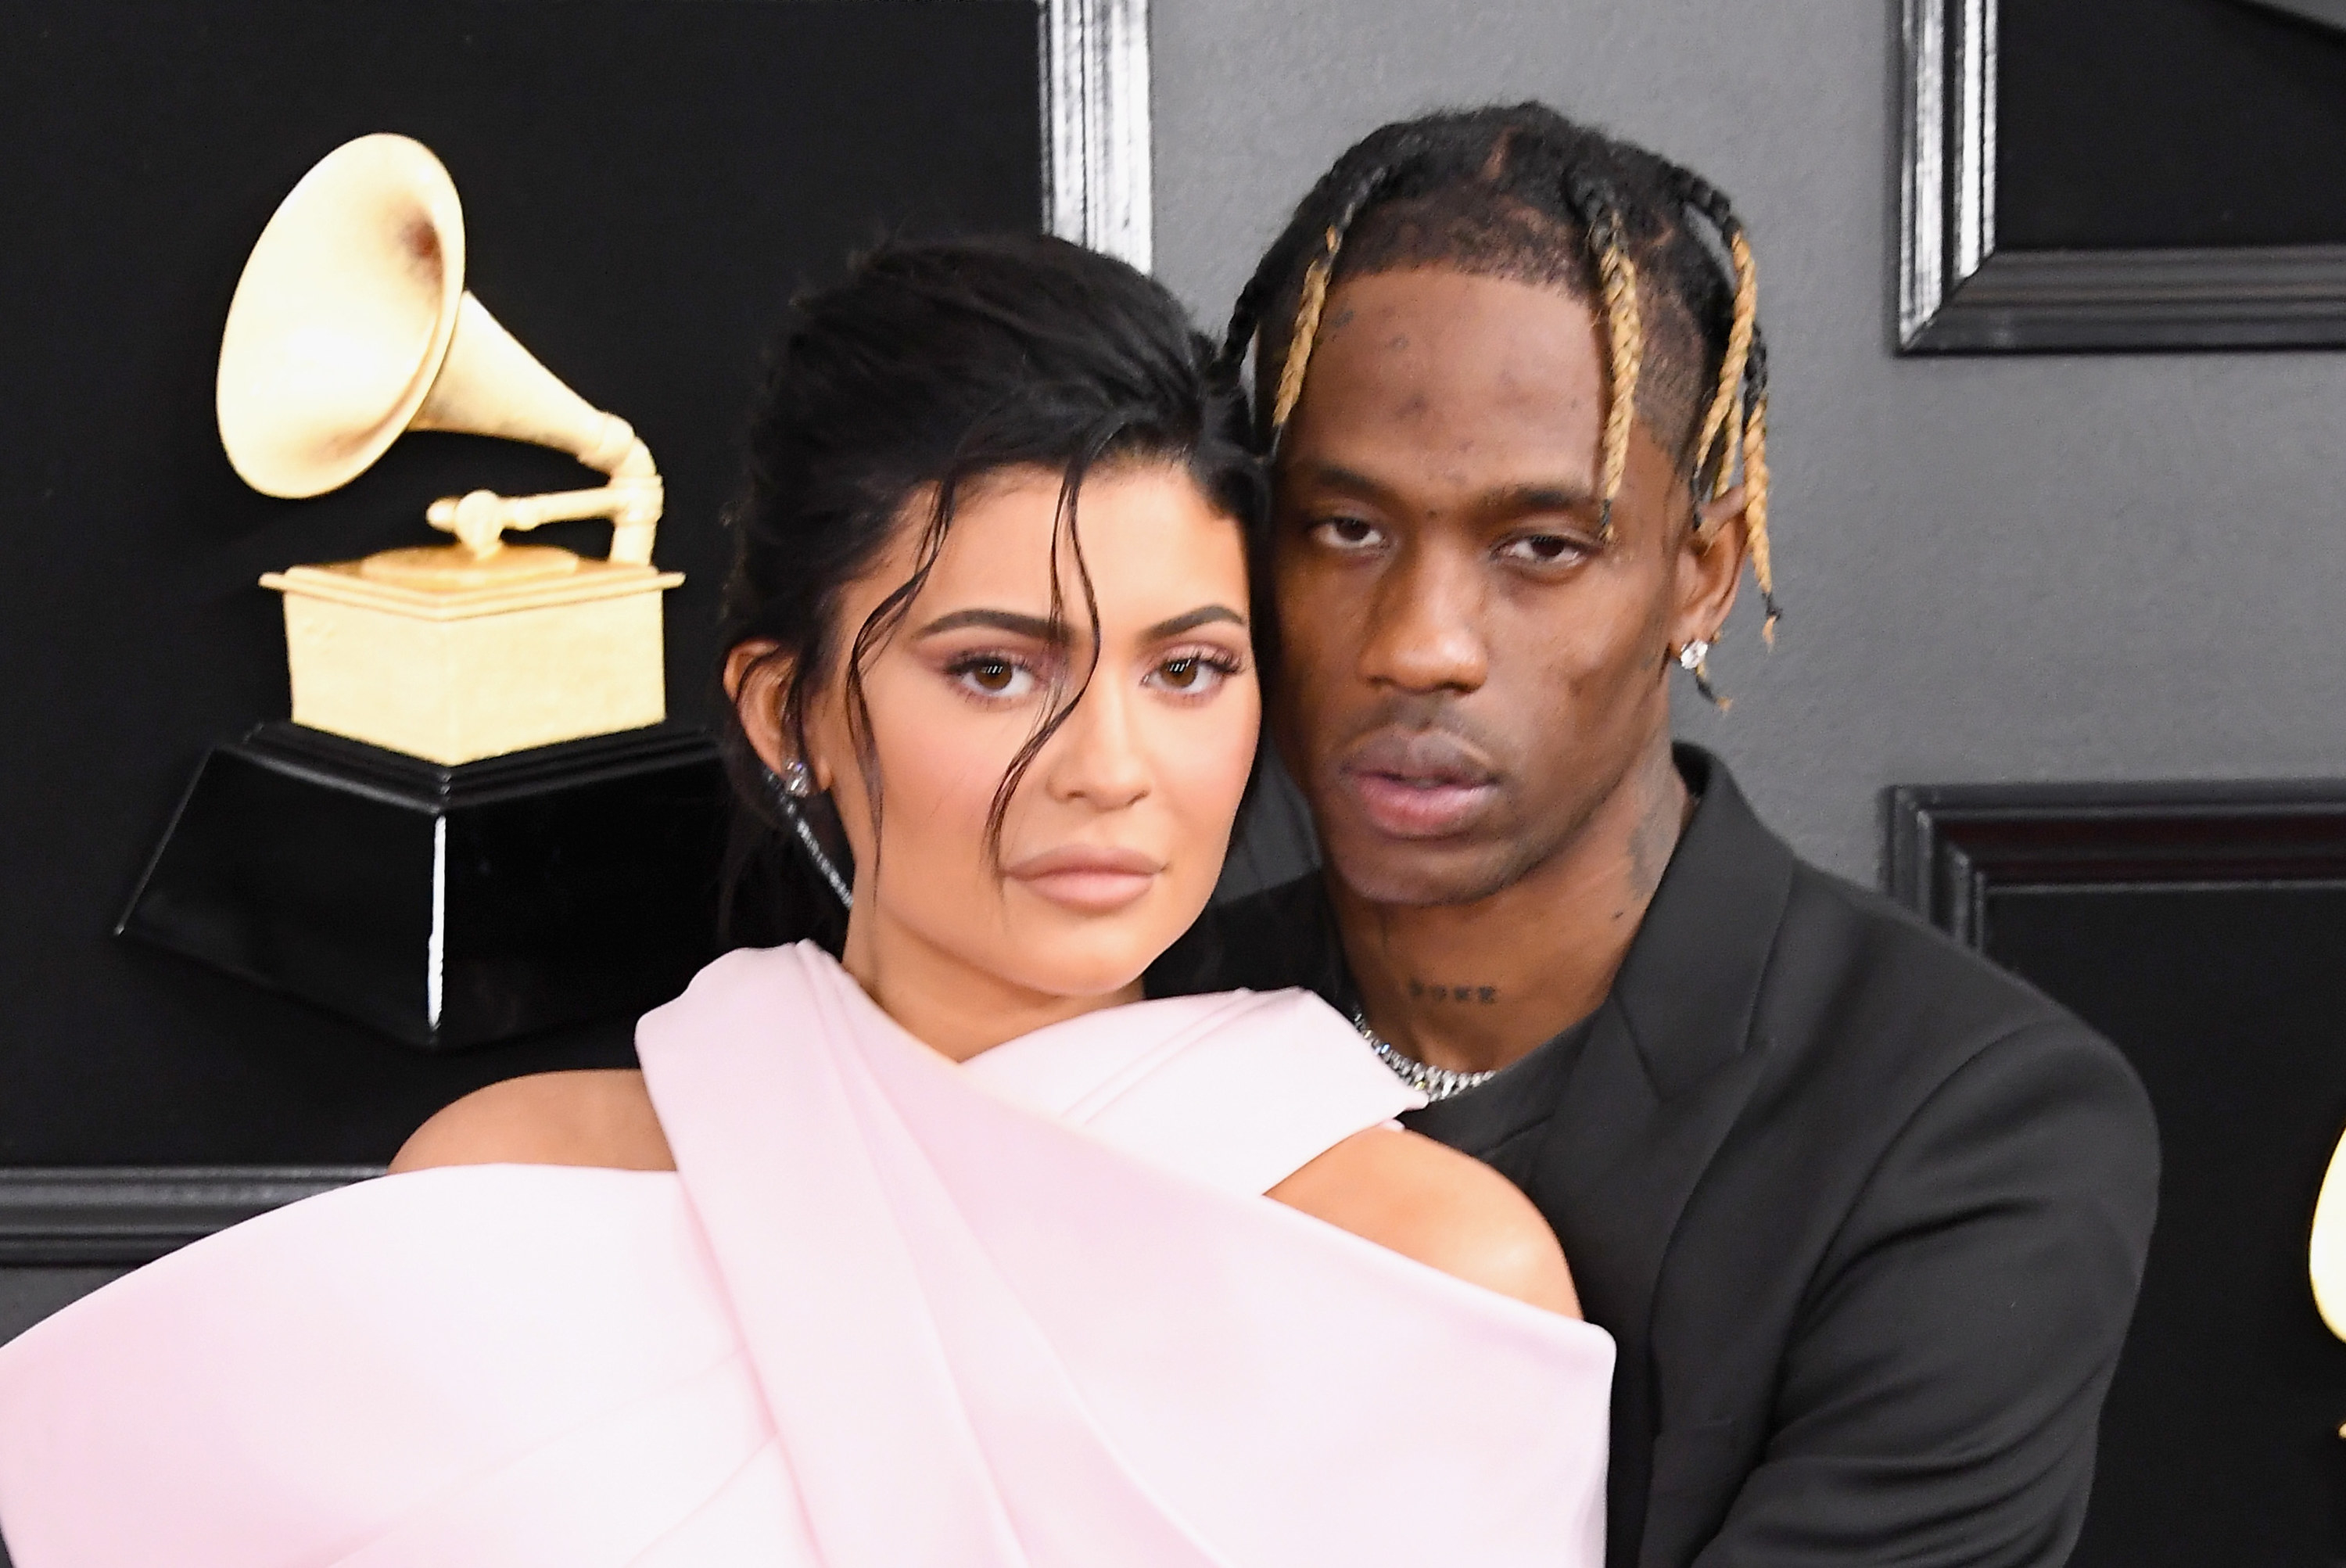 Kylie and Travis pose together at an event